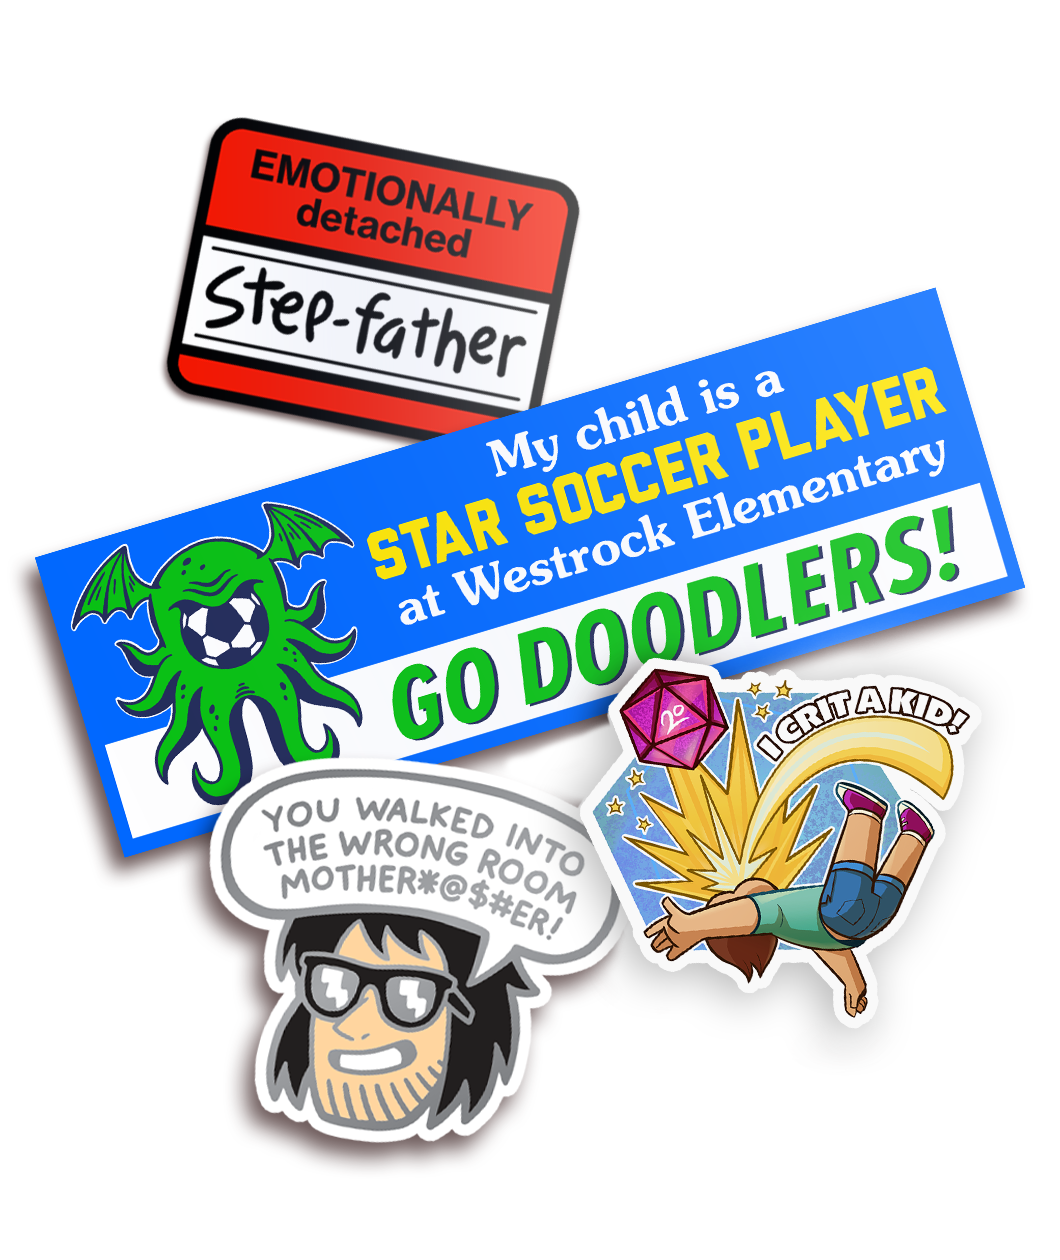 Name tag sticker that says, "Emotionally detached Step-father". A larger blue bumper sticker that says, "My child is a STAR SOCCER PLAYER at Westrock Elementary GO DOODLERS!" A sticker of a man's head with a speech bubble that says, "You walked into the wrong room mother+@$#er!" A sticker of a kid falling backward after being hit in the face with a large pink D20 that says, "I CRIT A KID!"